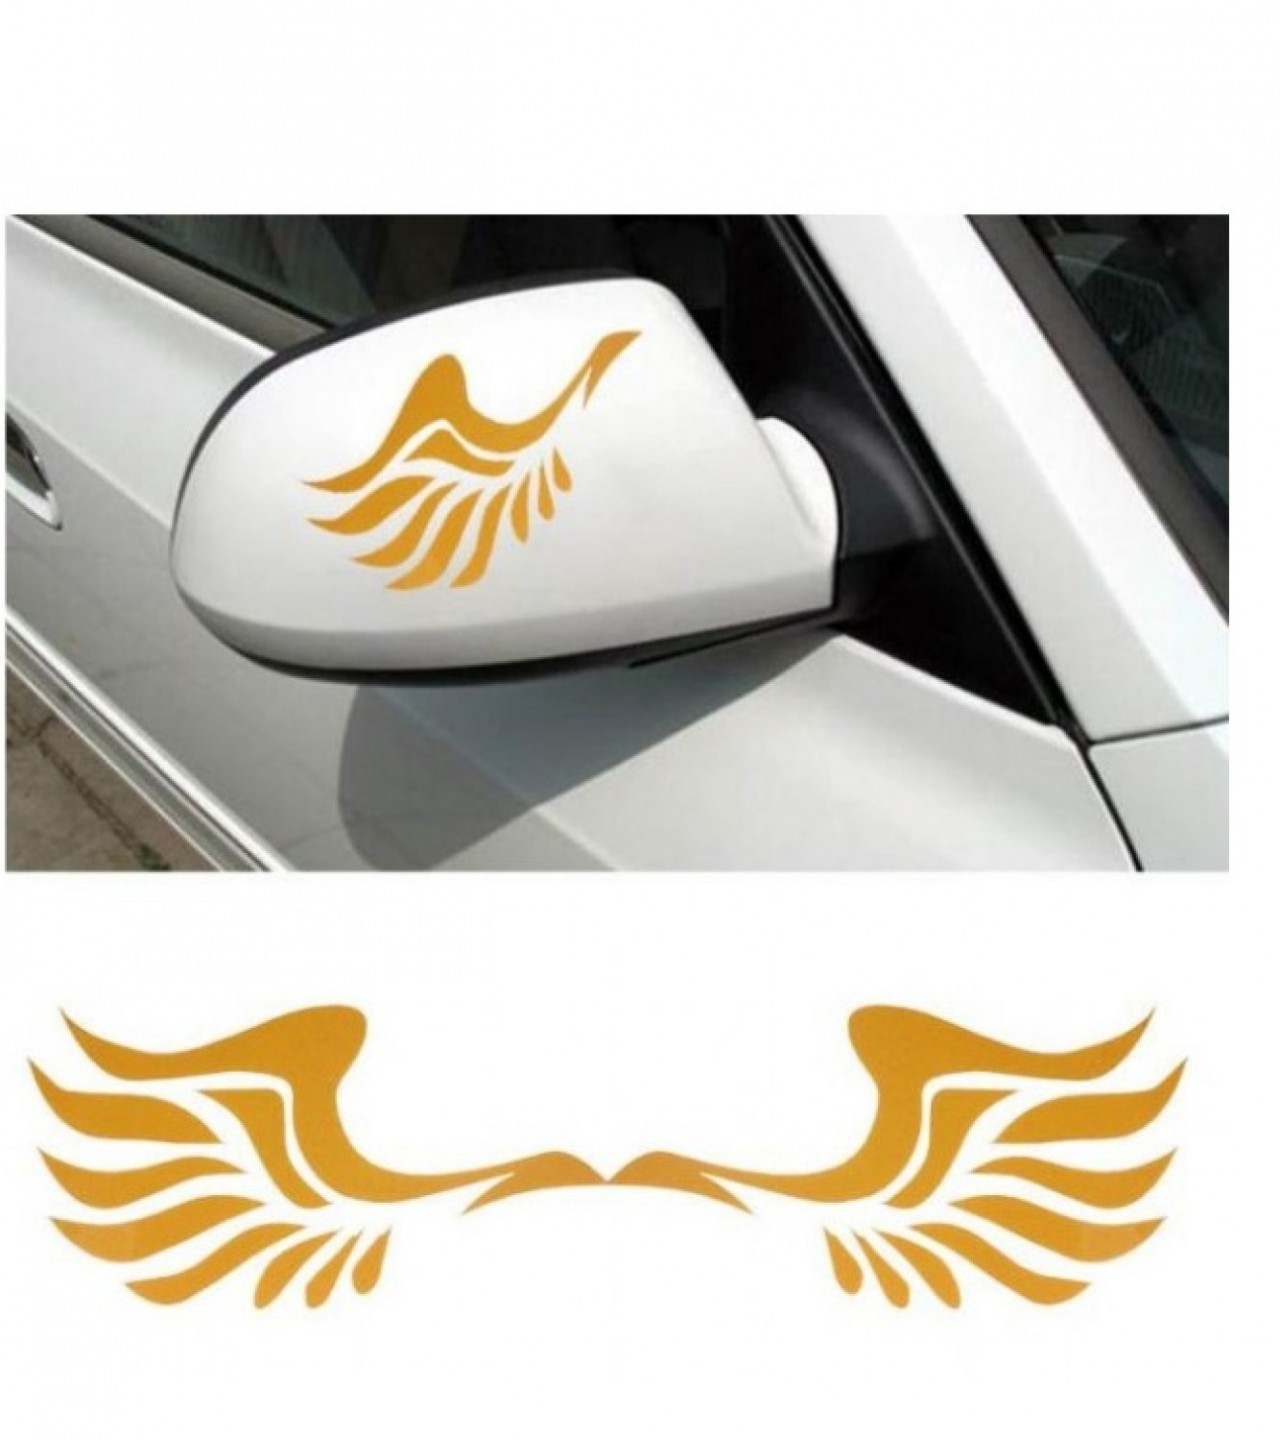 Mirror Pair of Wings Car Styling Stickers - Yellow